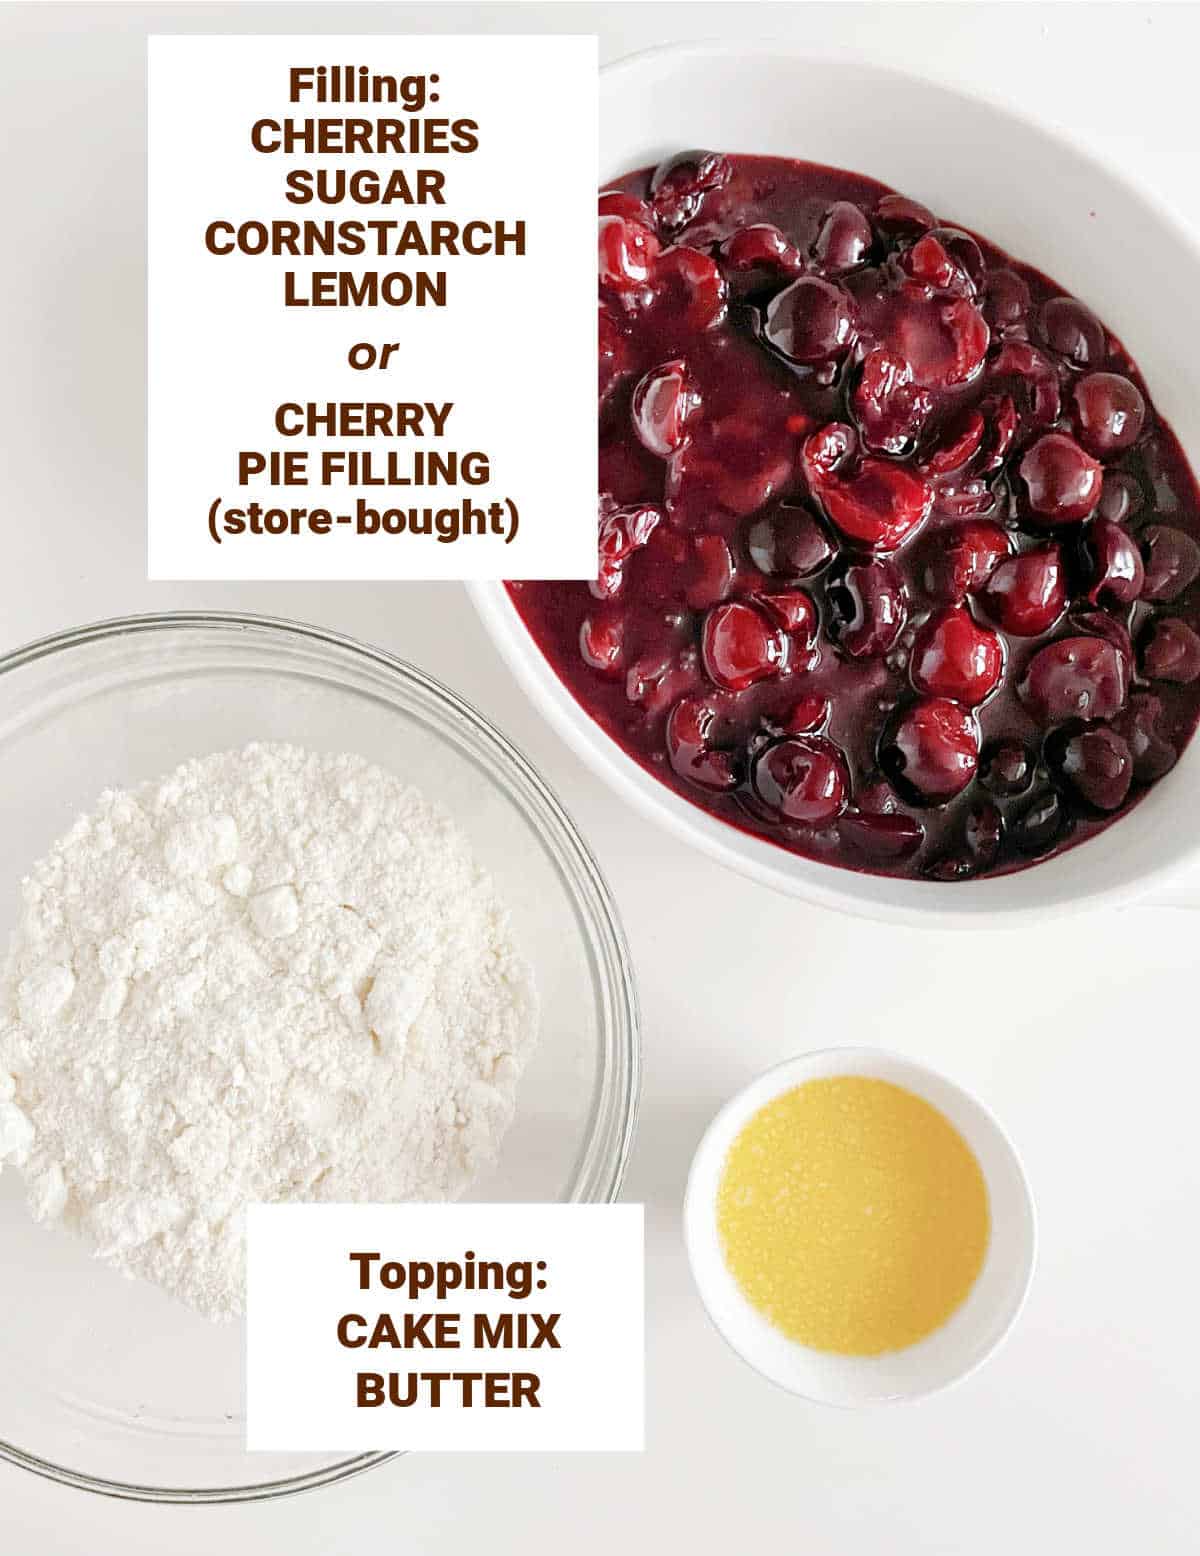 White surface with bowls containing ingredients for cherry dump cake including pie filling, butter, cake mix. Brown text overlay.